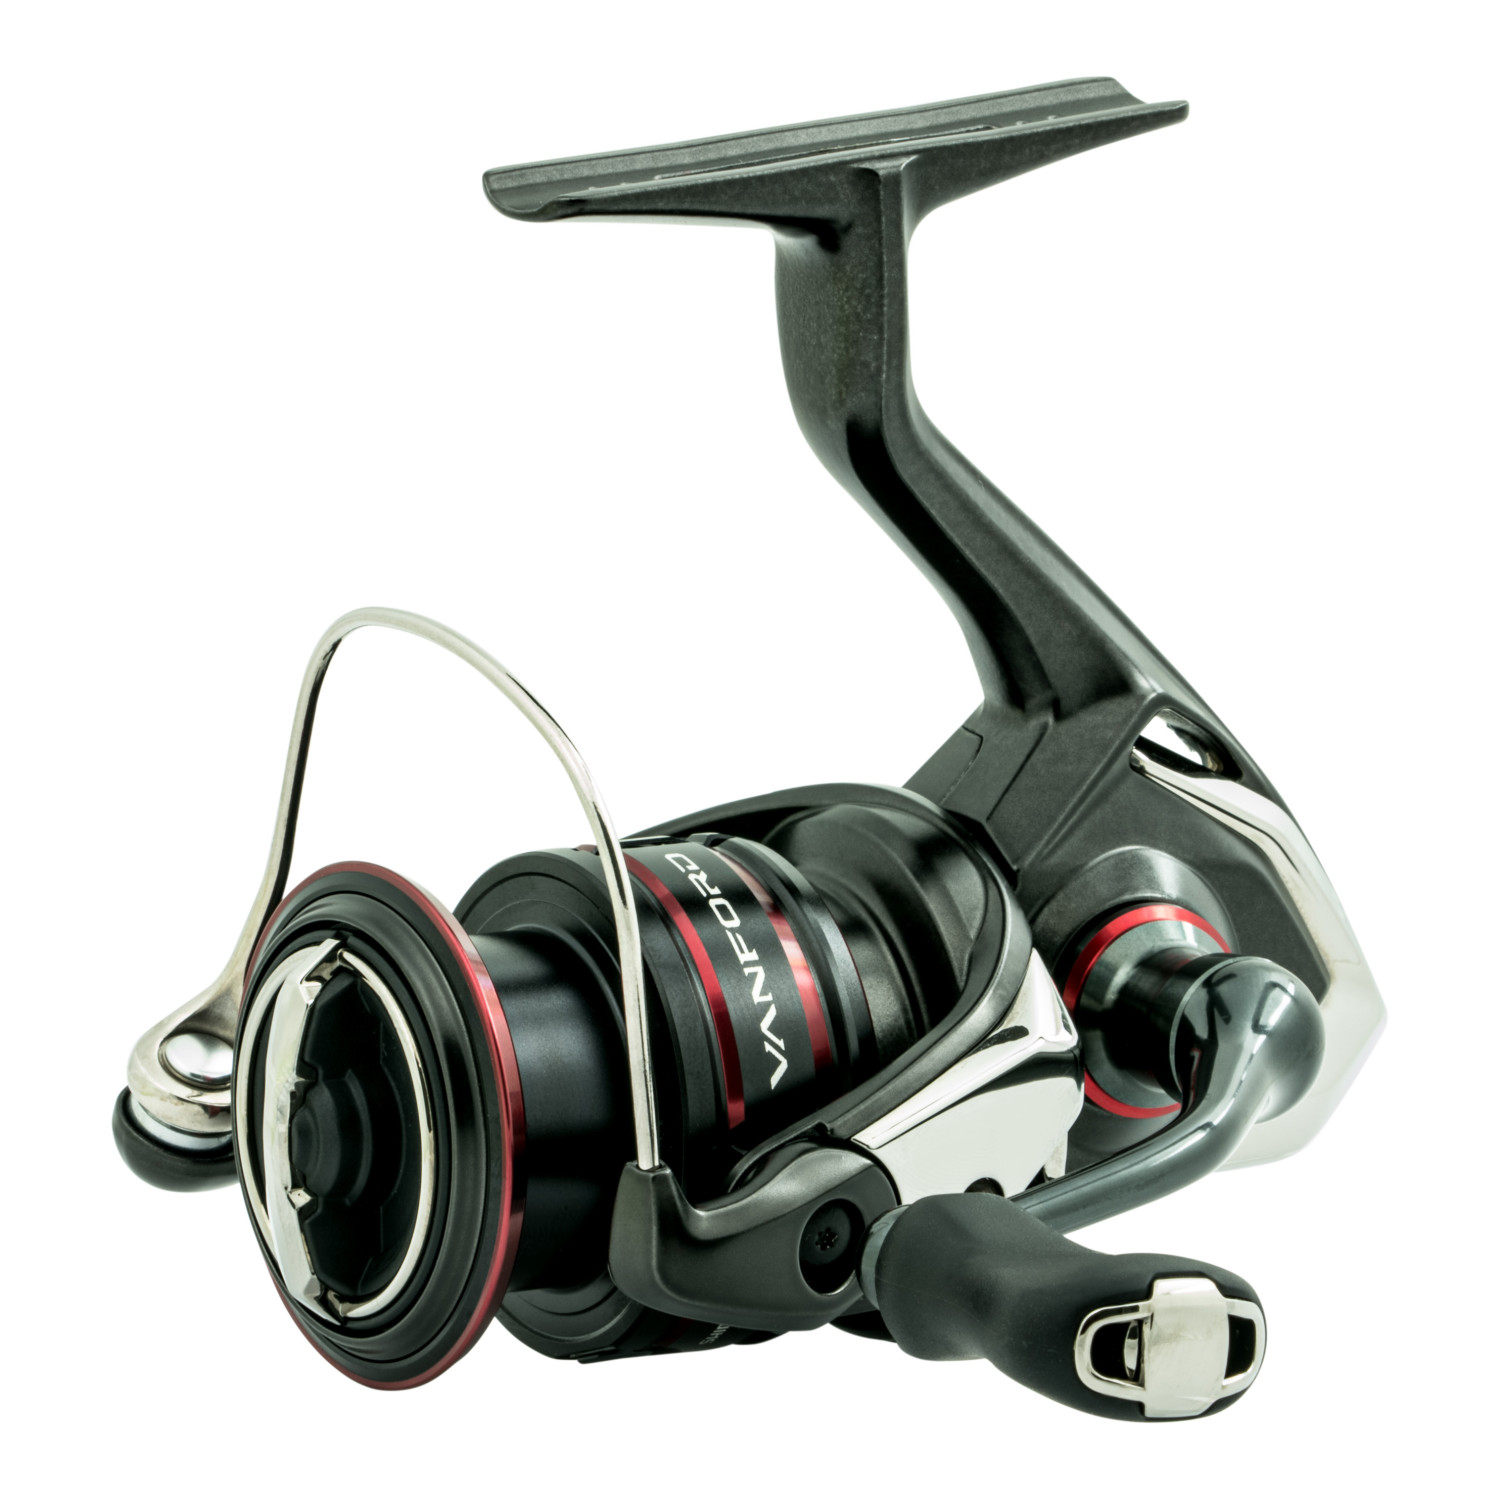 New Bass Tackle from ICAST 2020 - On The Water